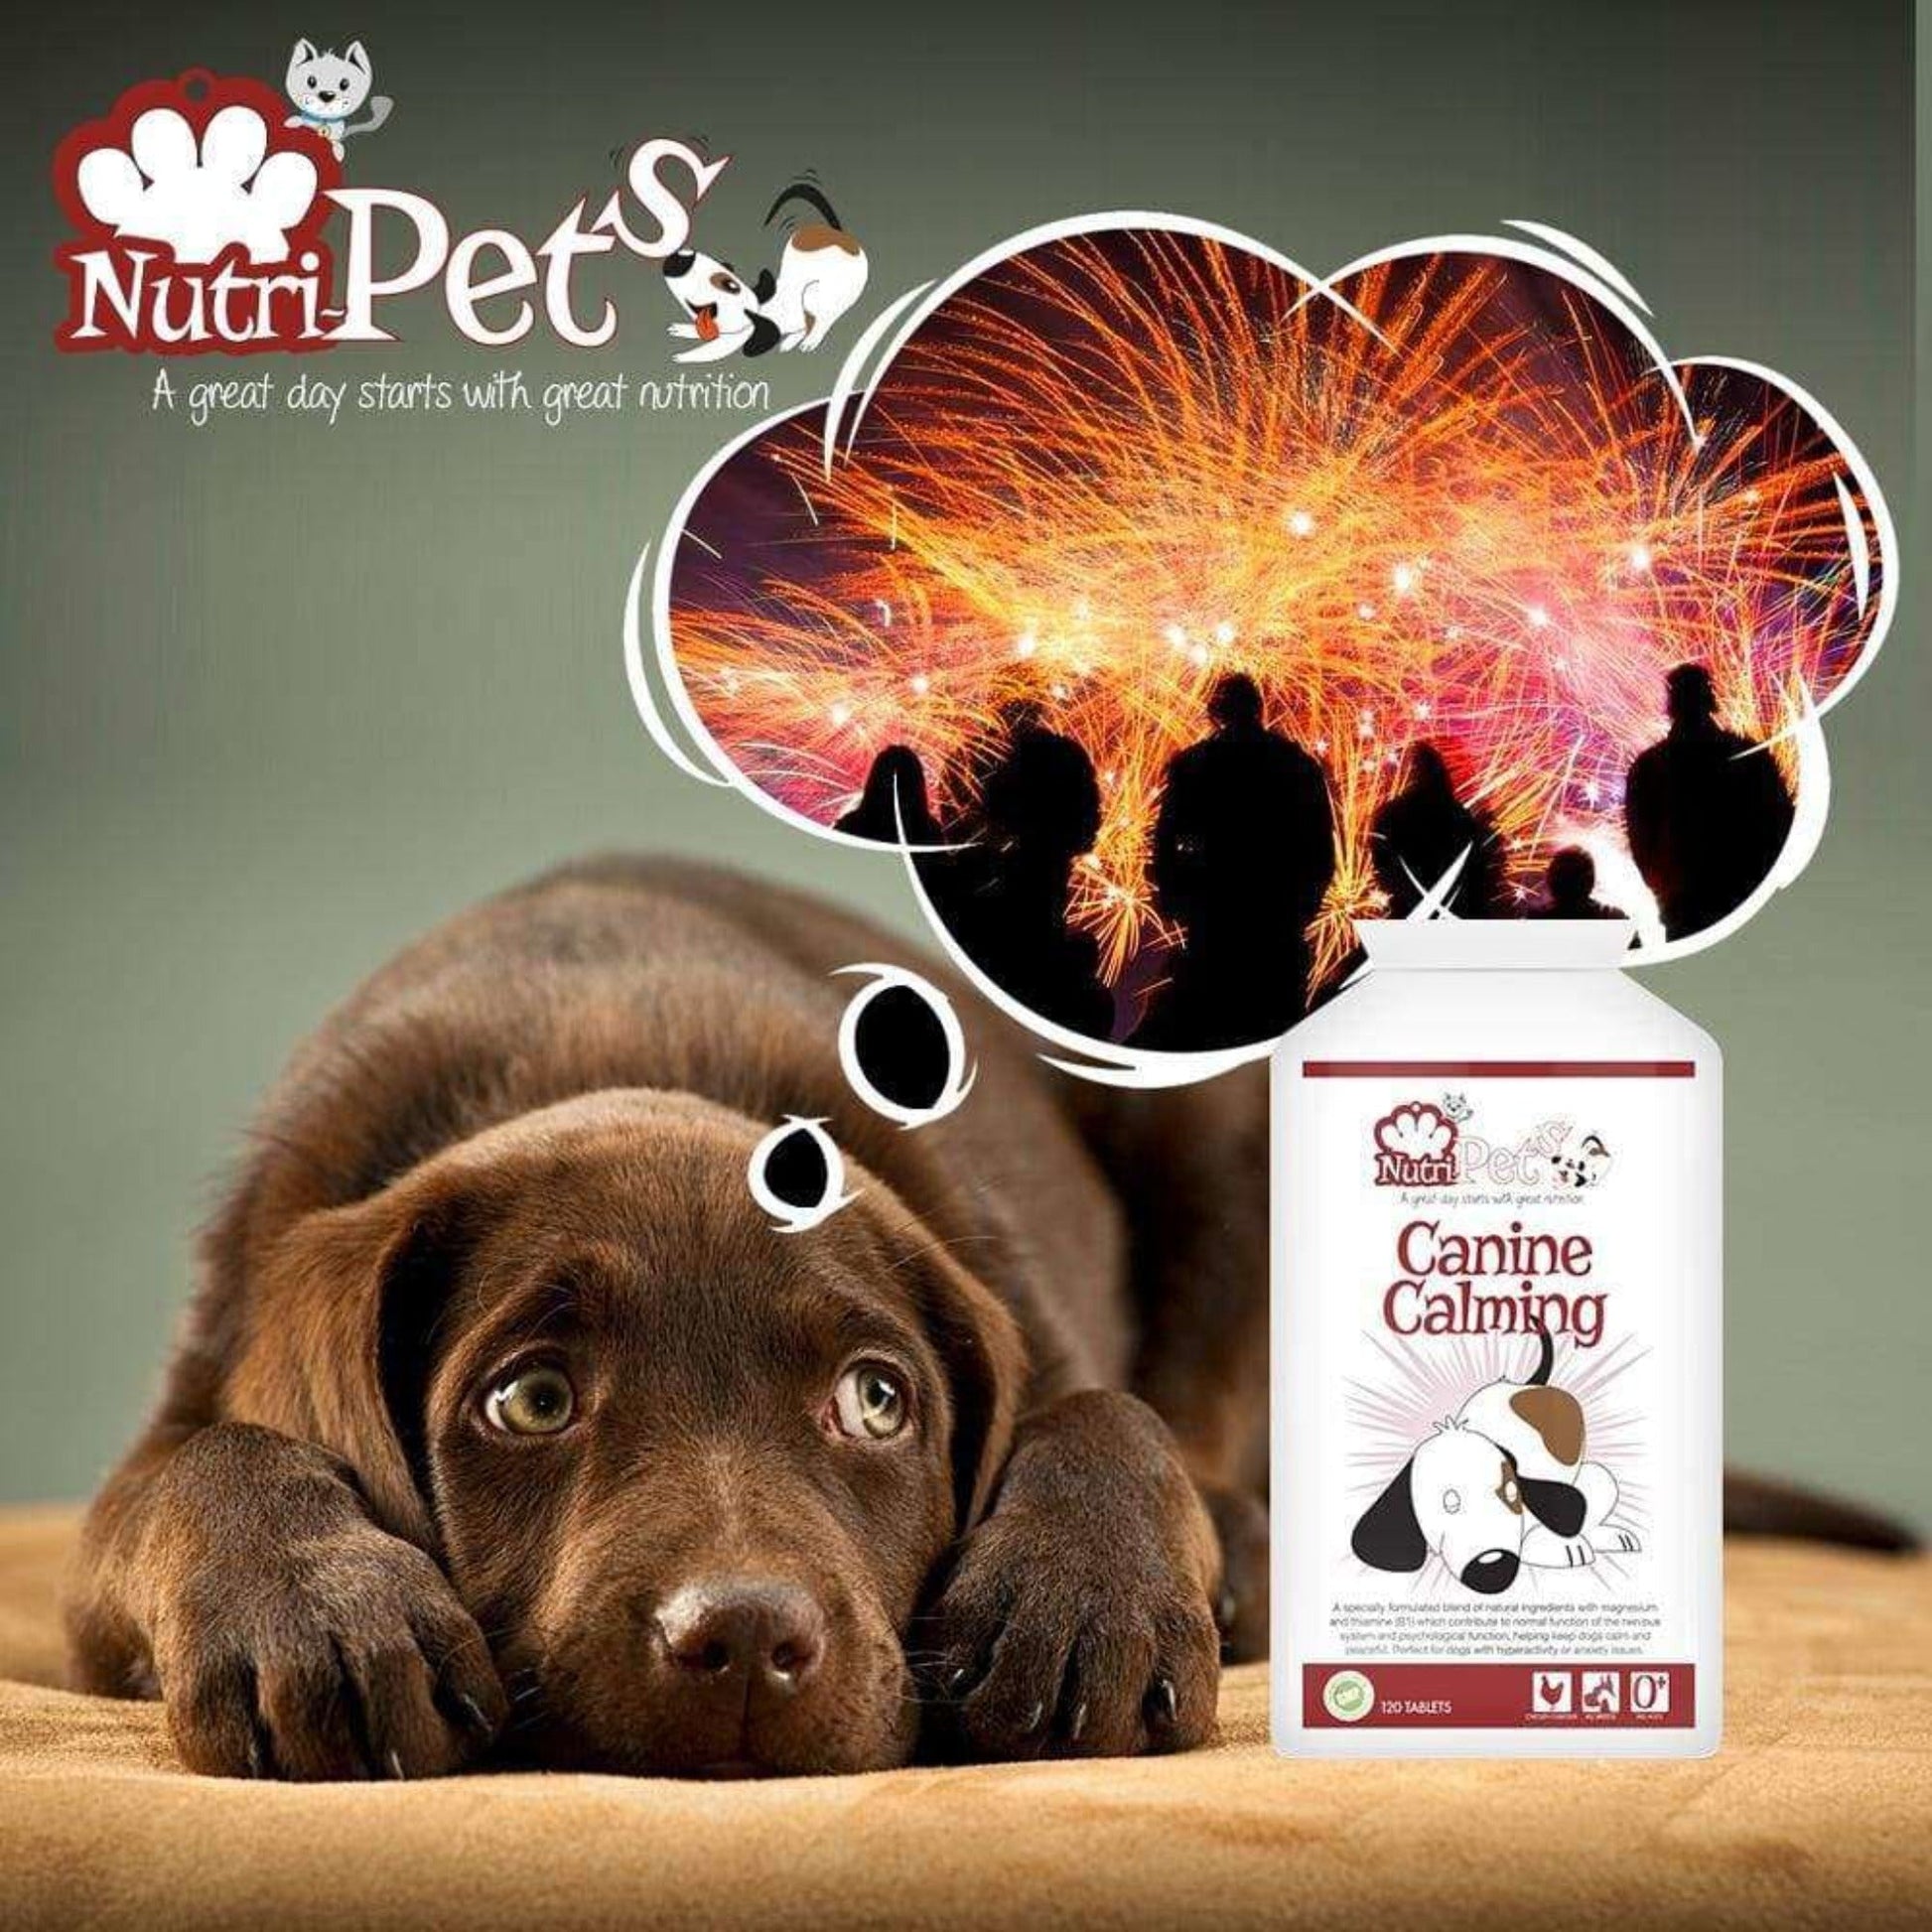 A chocolate labrador with a worried expression with a cartoon thought bubble depicting fireworks, a bottle of Canine Calming is in the foreground